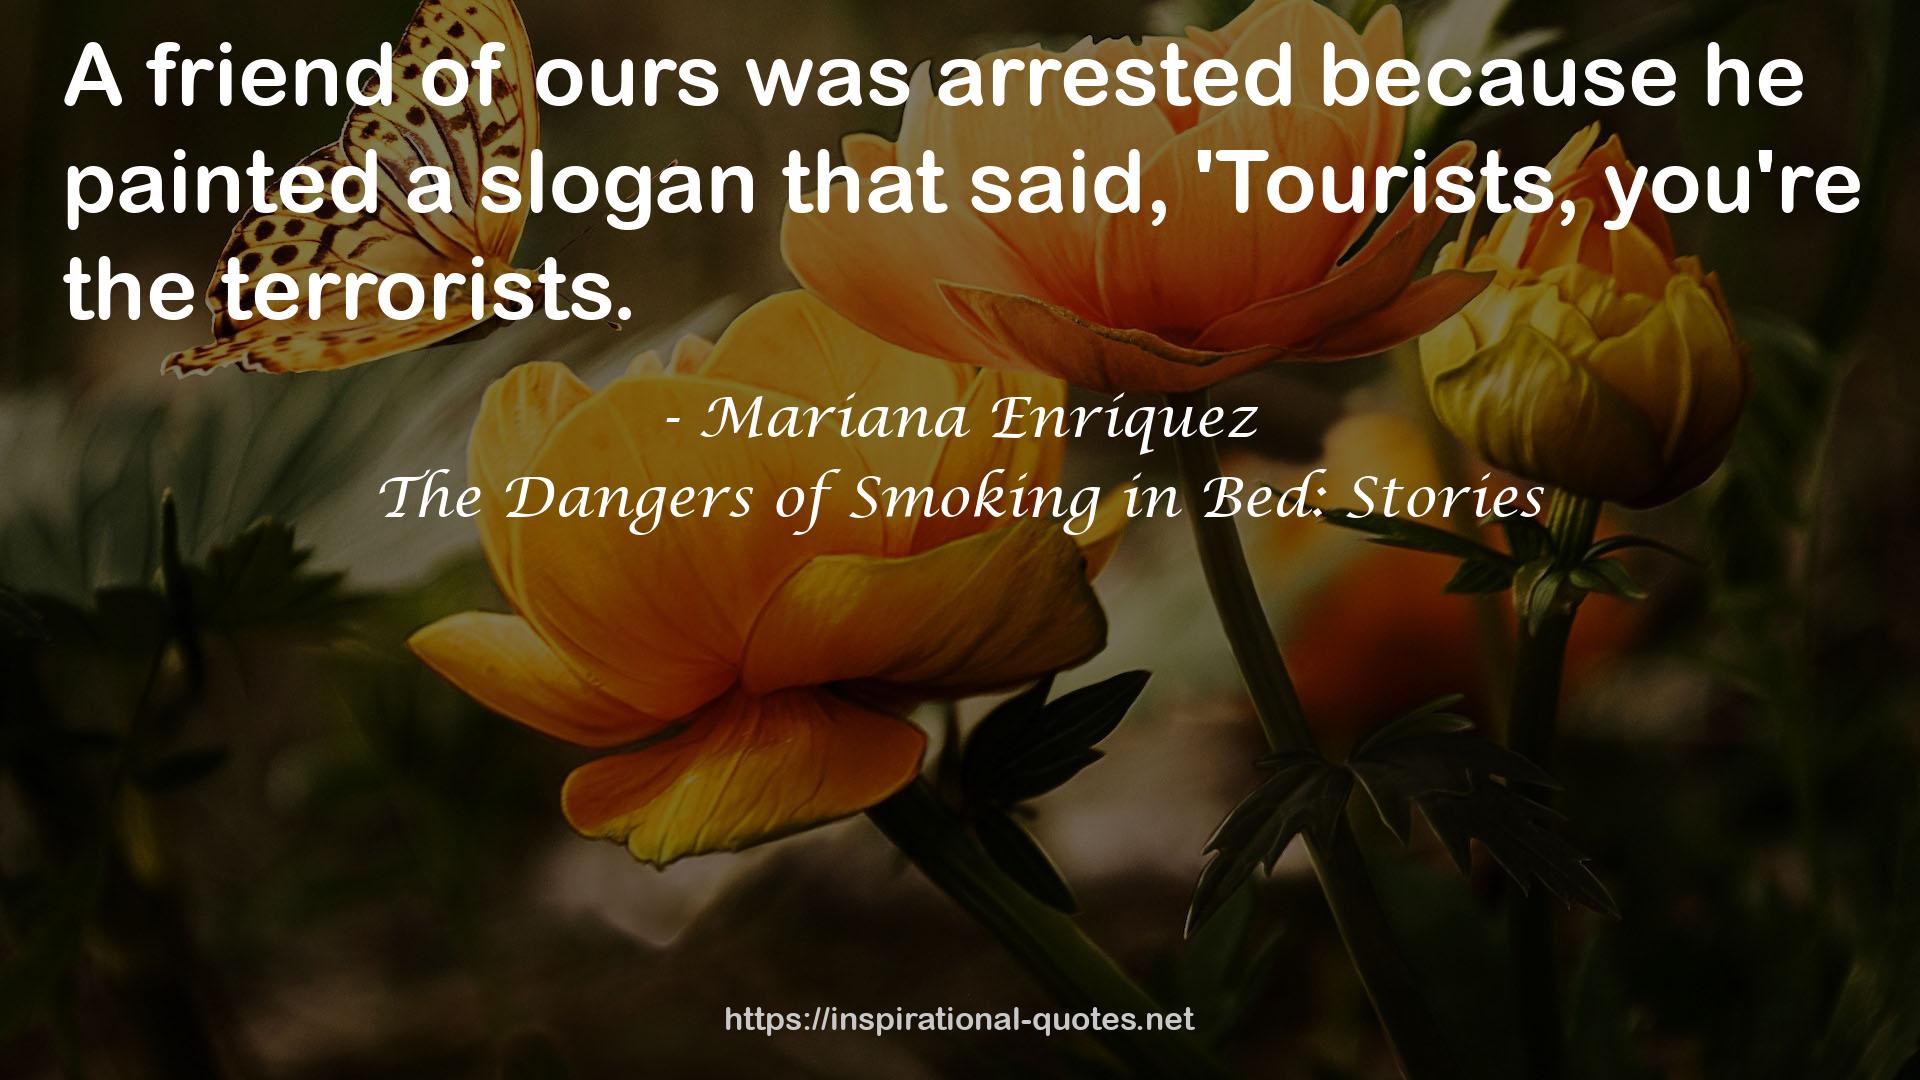 The Dangers of Smoking in Bed: Stories QUOTES